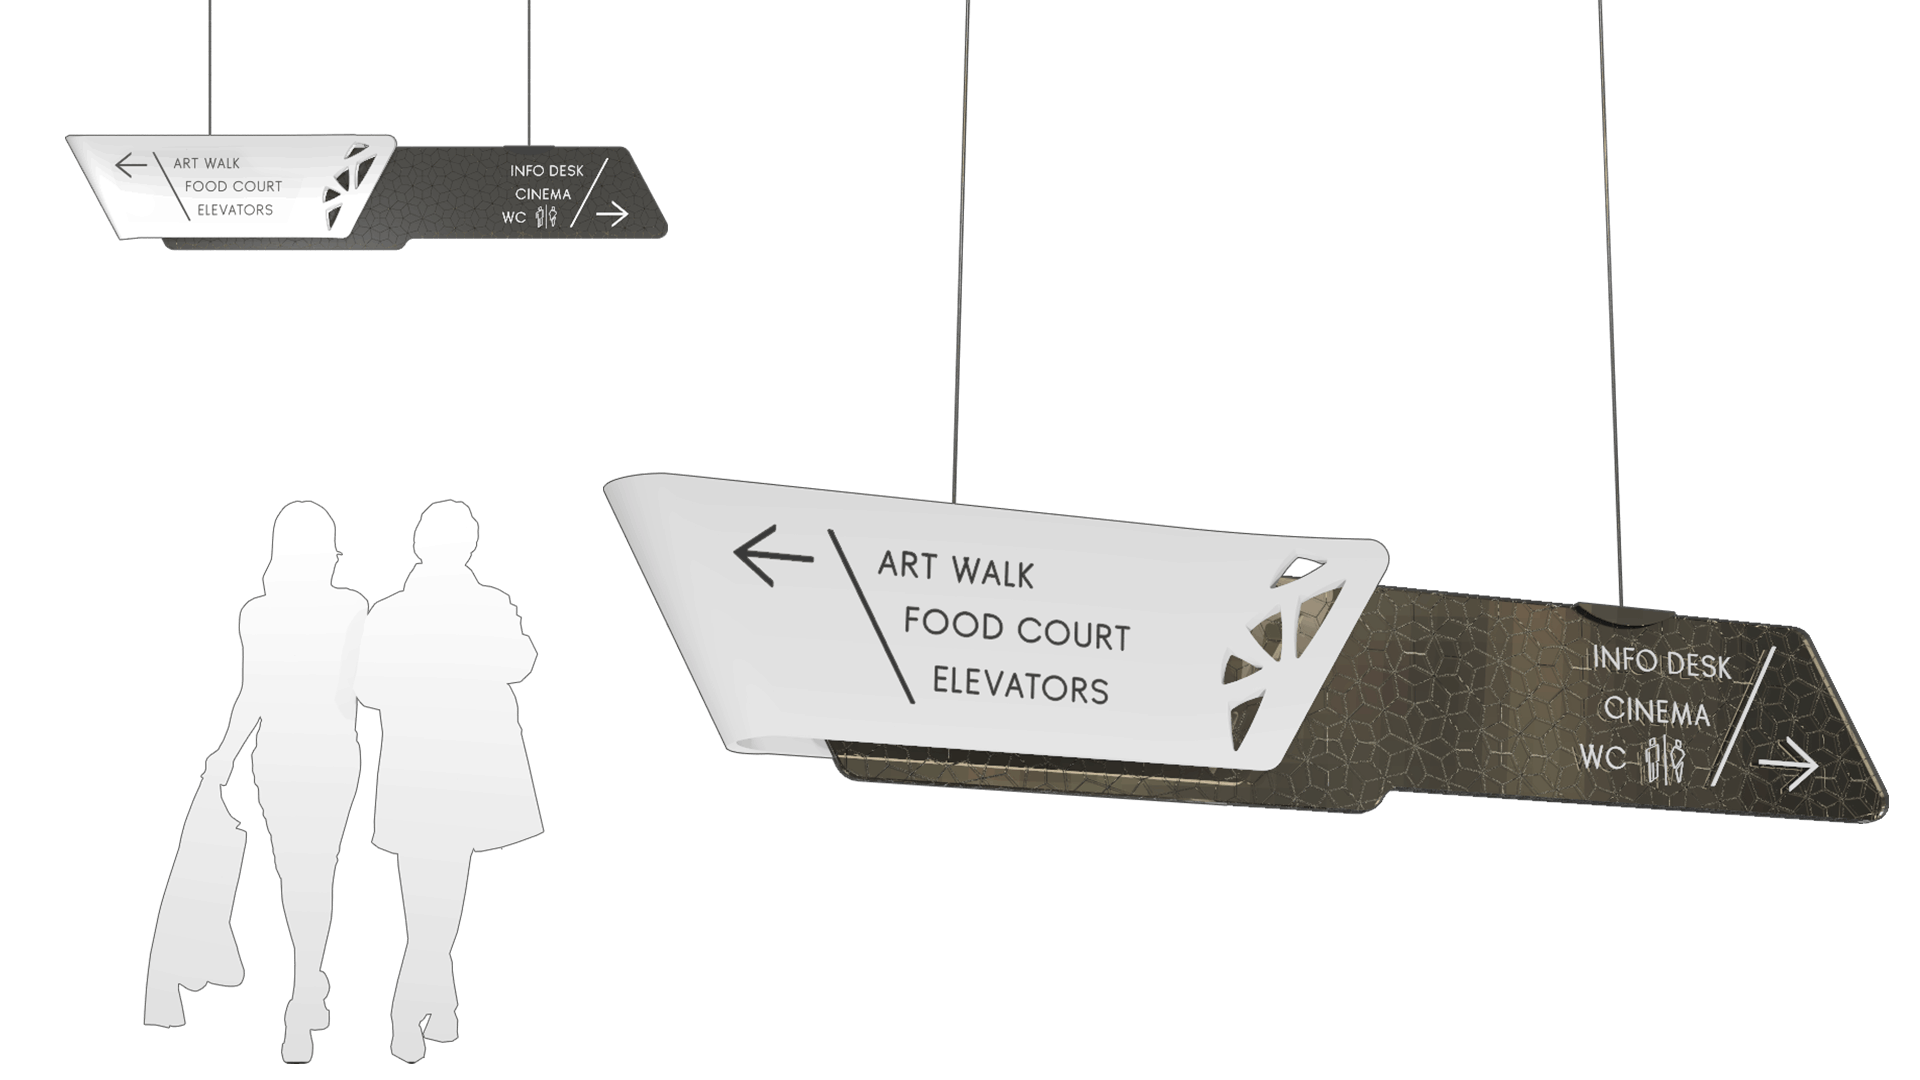 Overhead Directional Signage